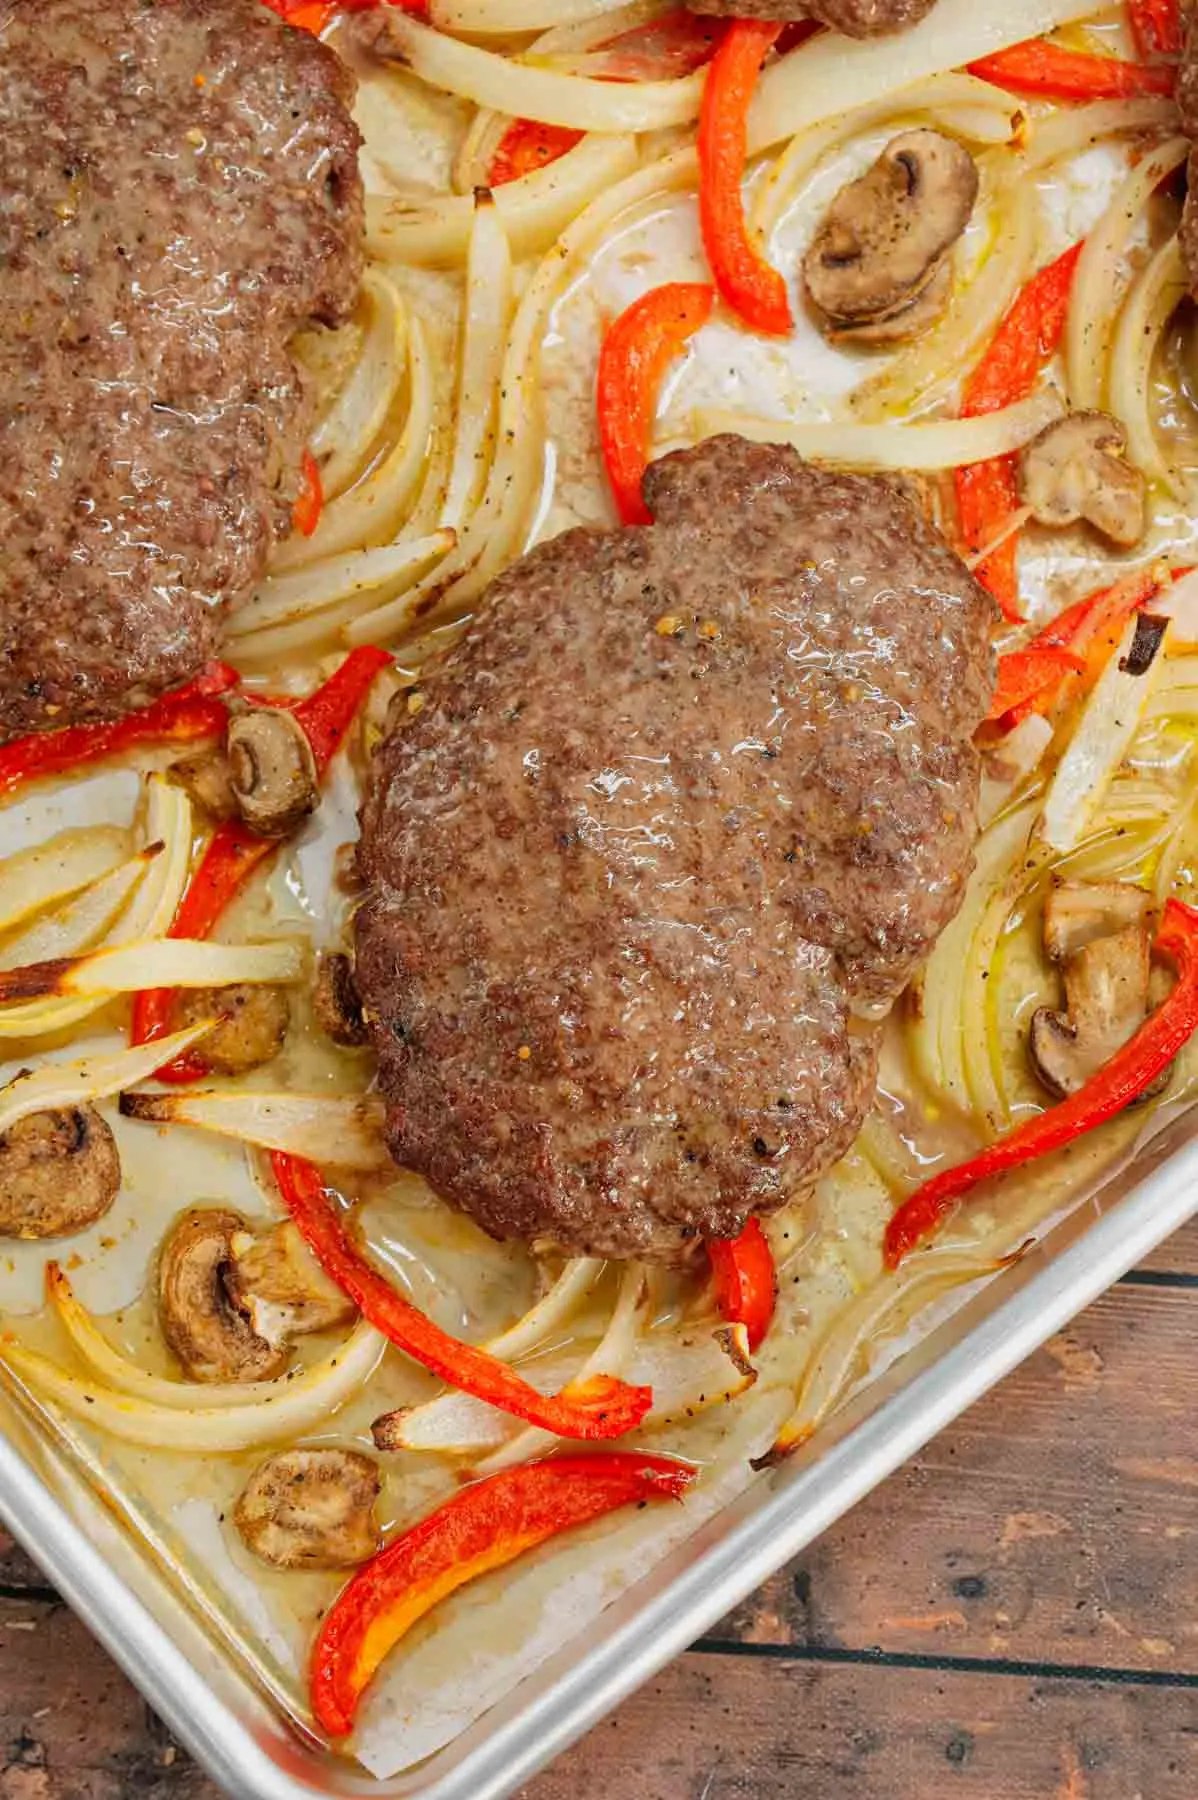 Oven Baked Hamburger Steaks are an easy sheet pan dinner recipe with seasoned ground beef patties cooked along with sliced onions, red bell peppers and mushrooms.